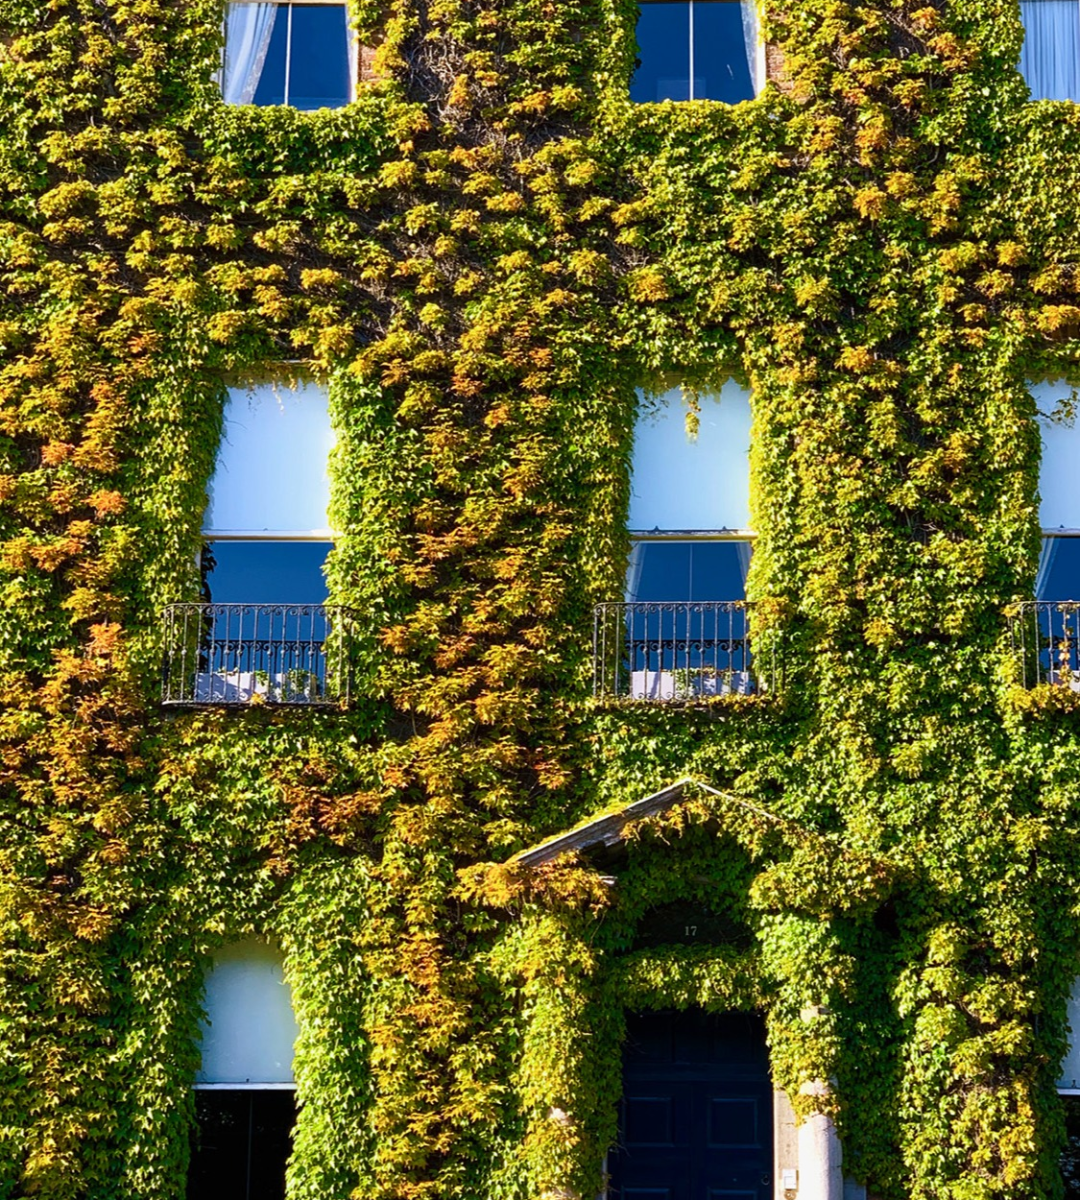 Image of ivy covered building in Dublin